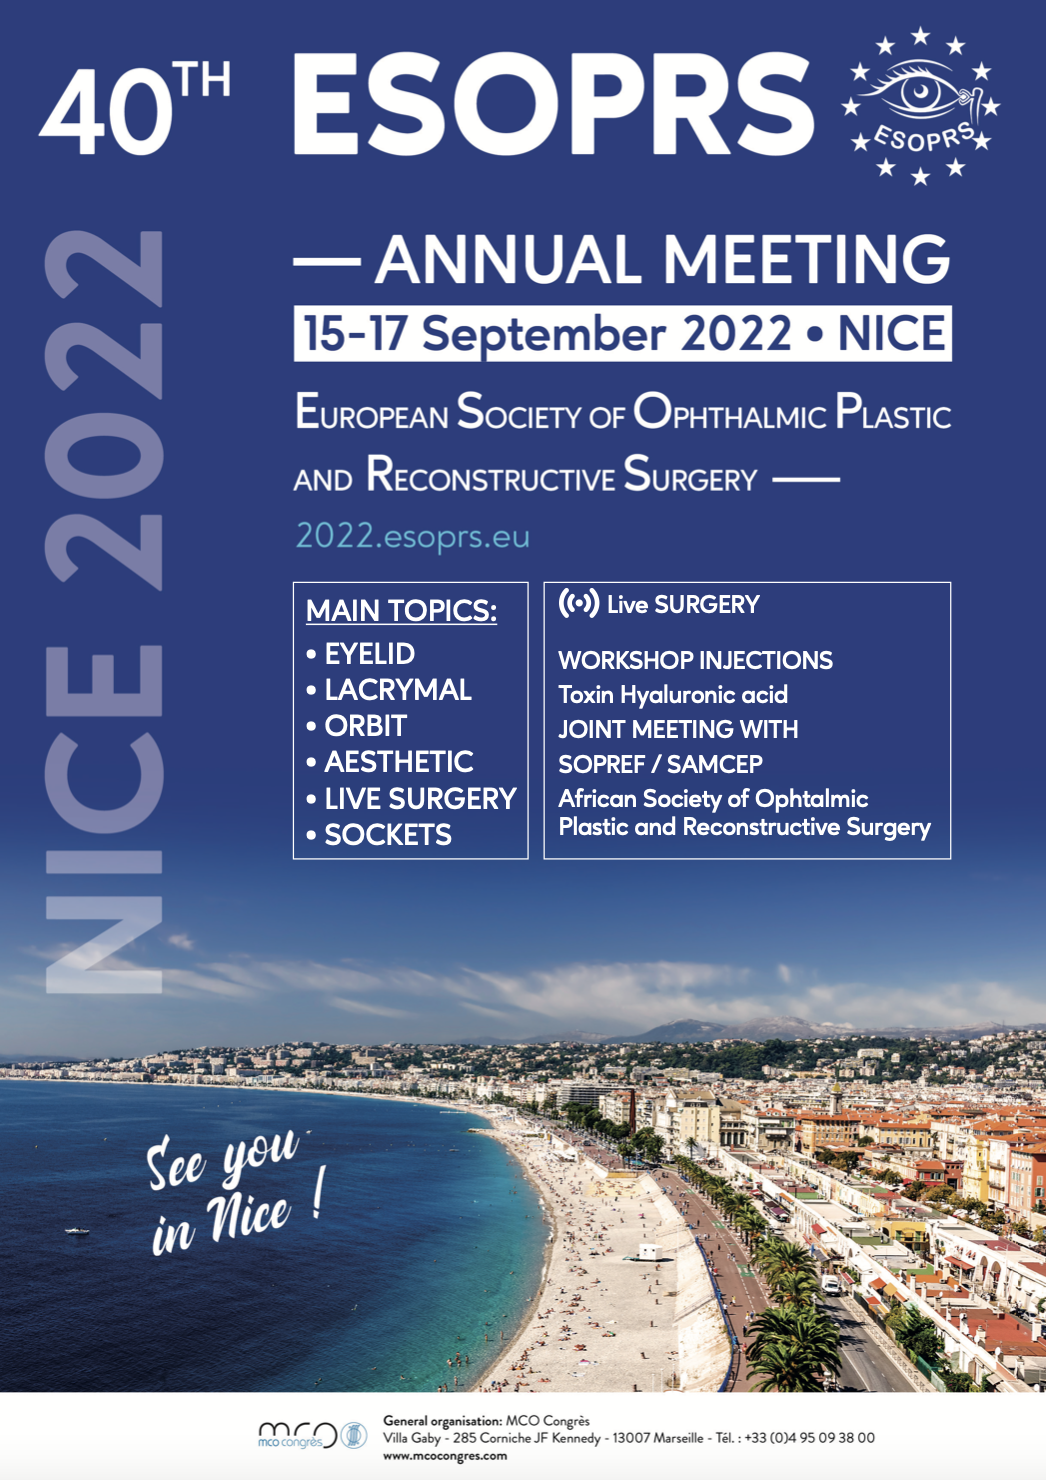 ESOPRS Annual Meeting 2022 in Nice, France